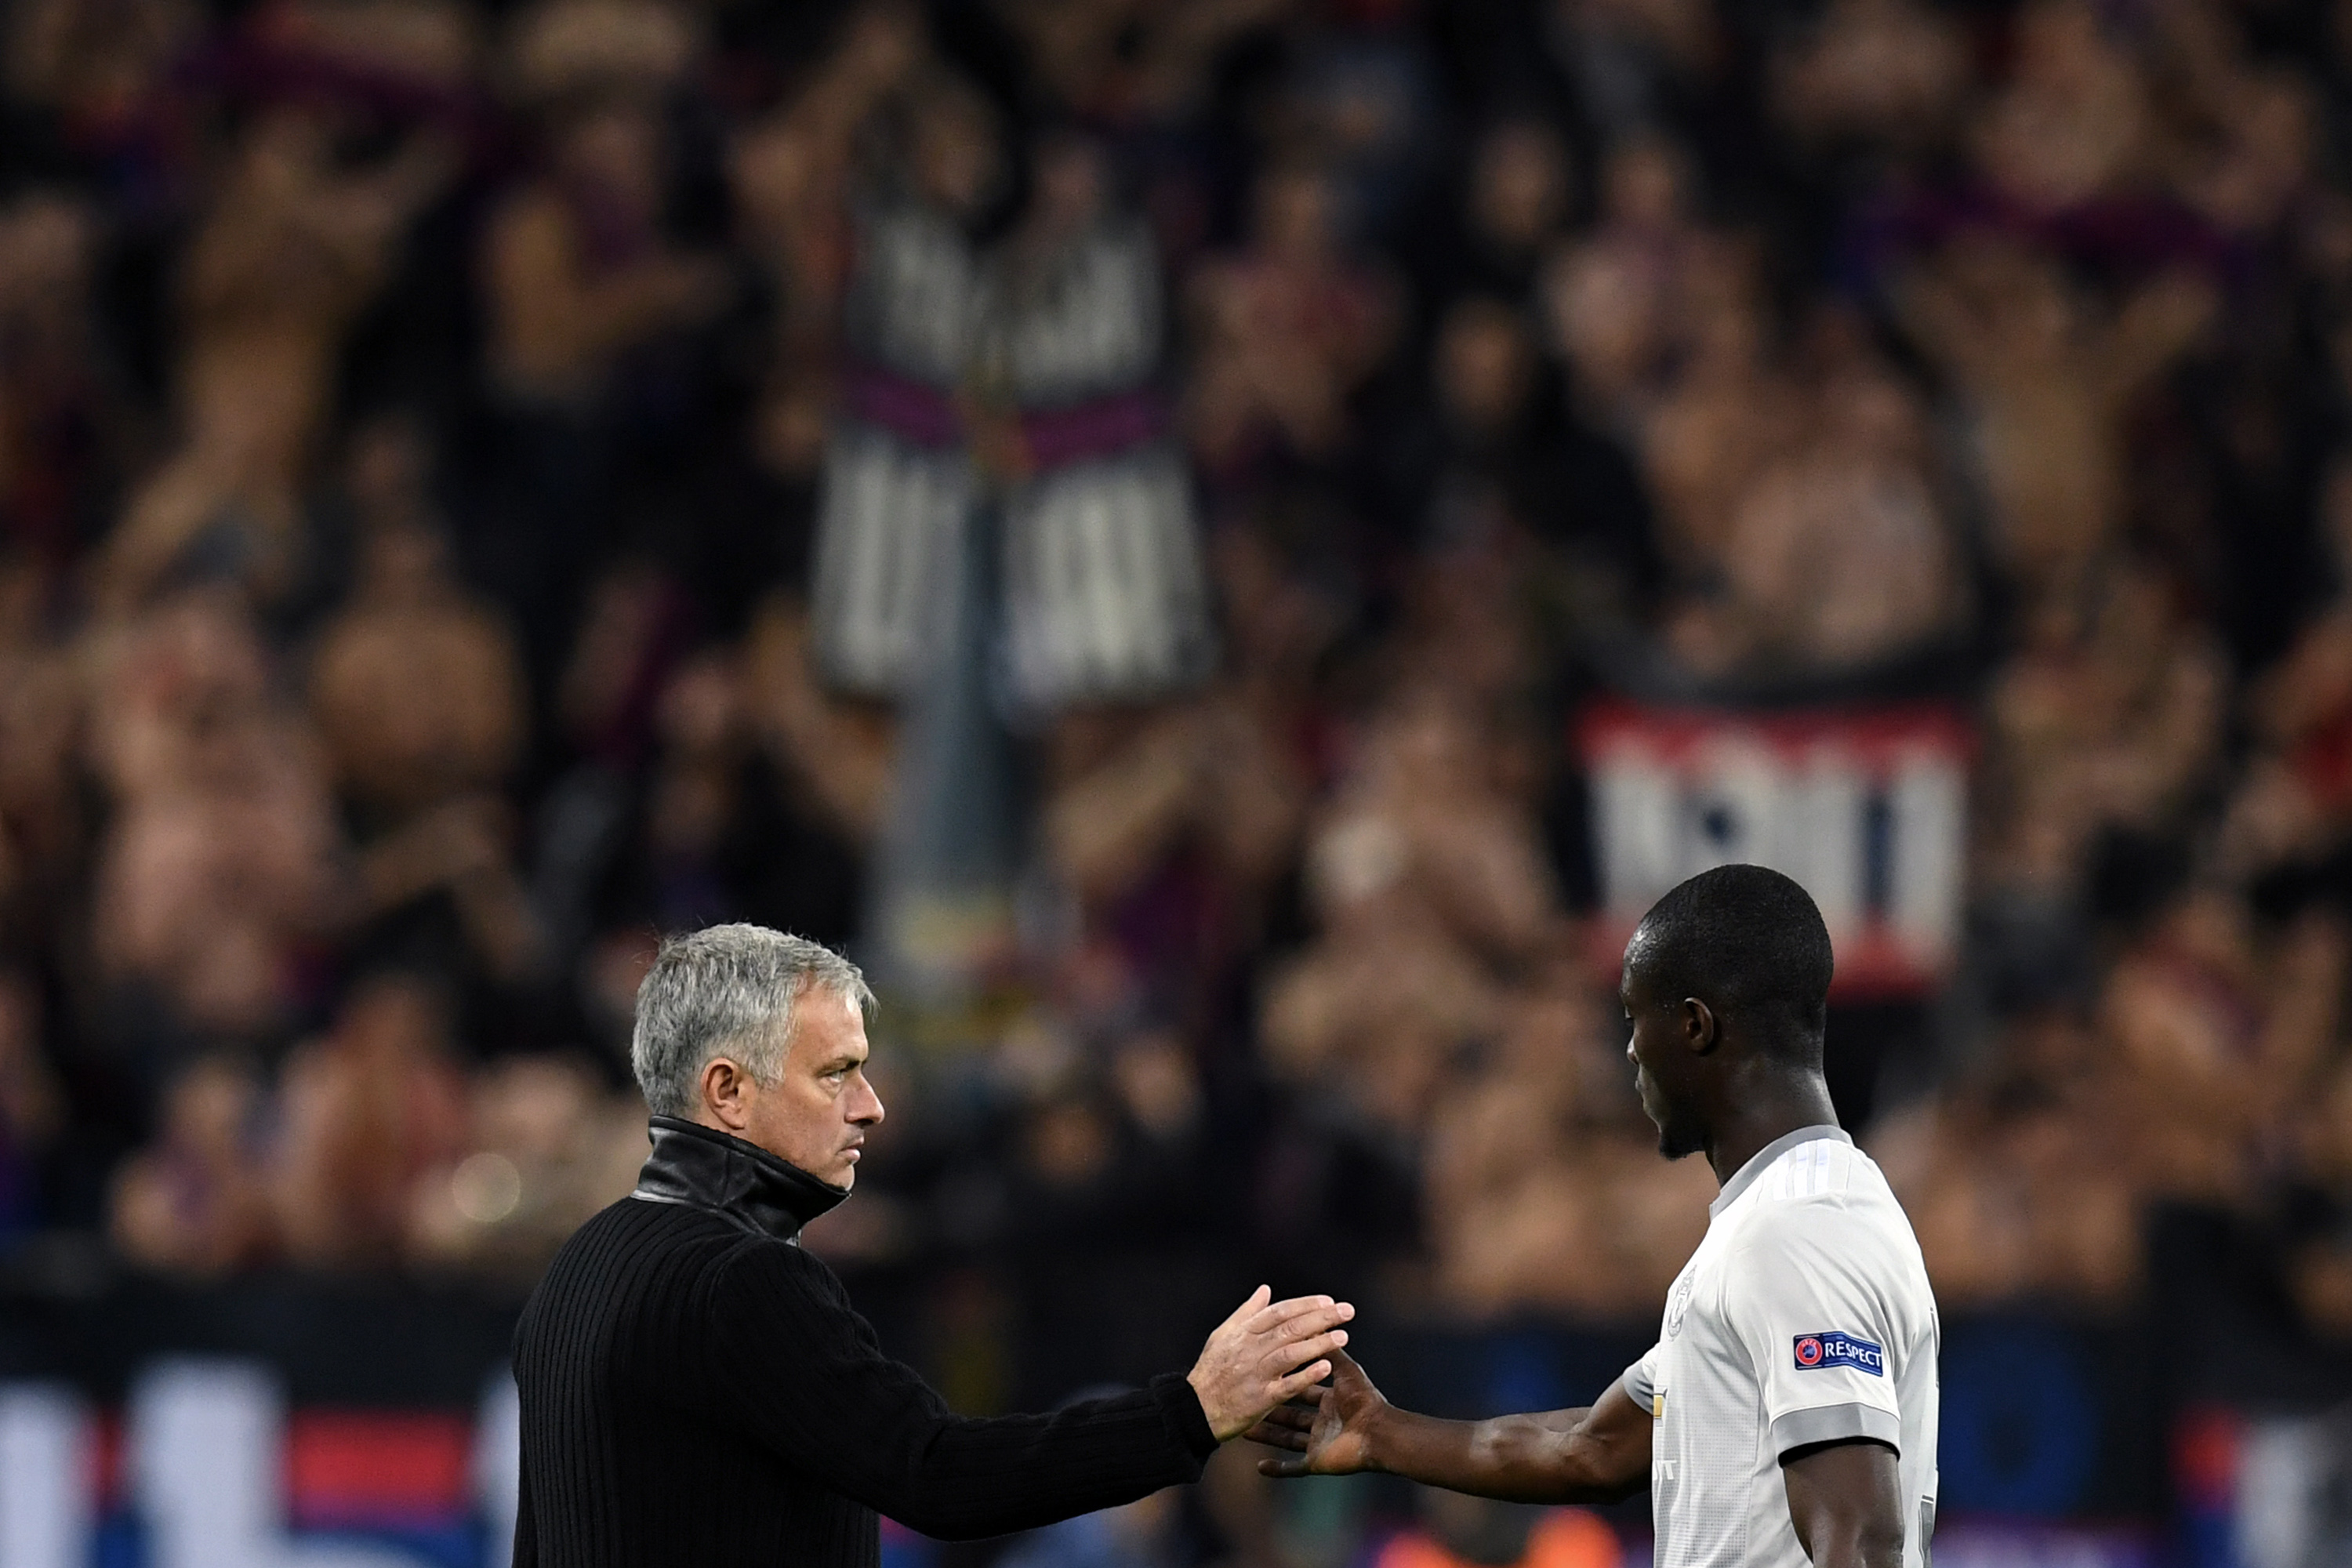 Manchester United's coach from Portugal Jose Mourinho thanks Manchester United's defender from Ivory Coast Eric Bailly after the UEFA Champions League Group A football match between PFC CSKA Moscow and Manchester United FC in Moscow on September 27, 2017. / AFP PHOTO / Kirill KUDRYAVTSEV        (Photo credit should read KIRILL KUDRYAVTSEV/AFP/Getty Images)